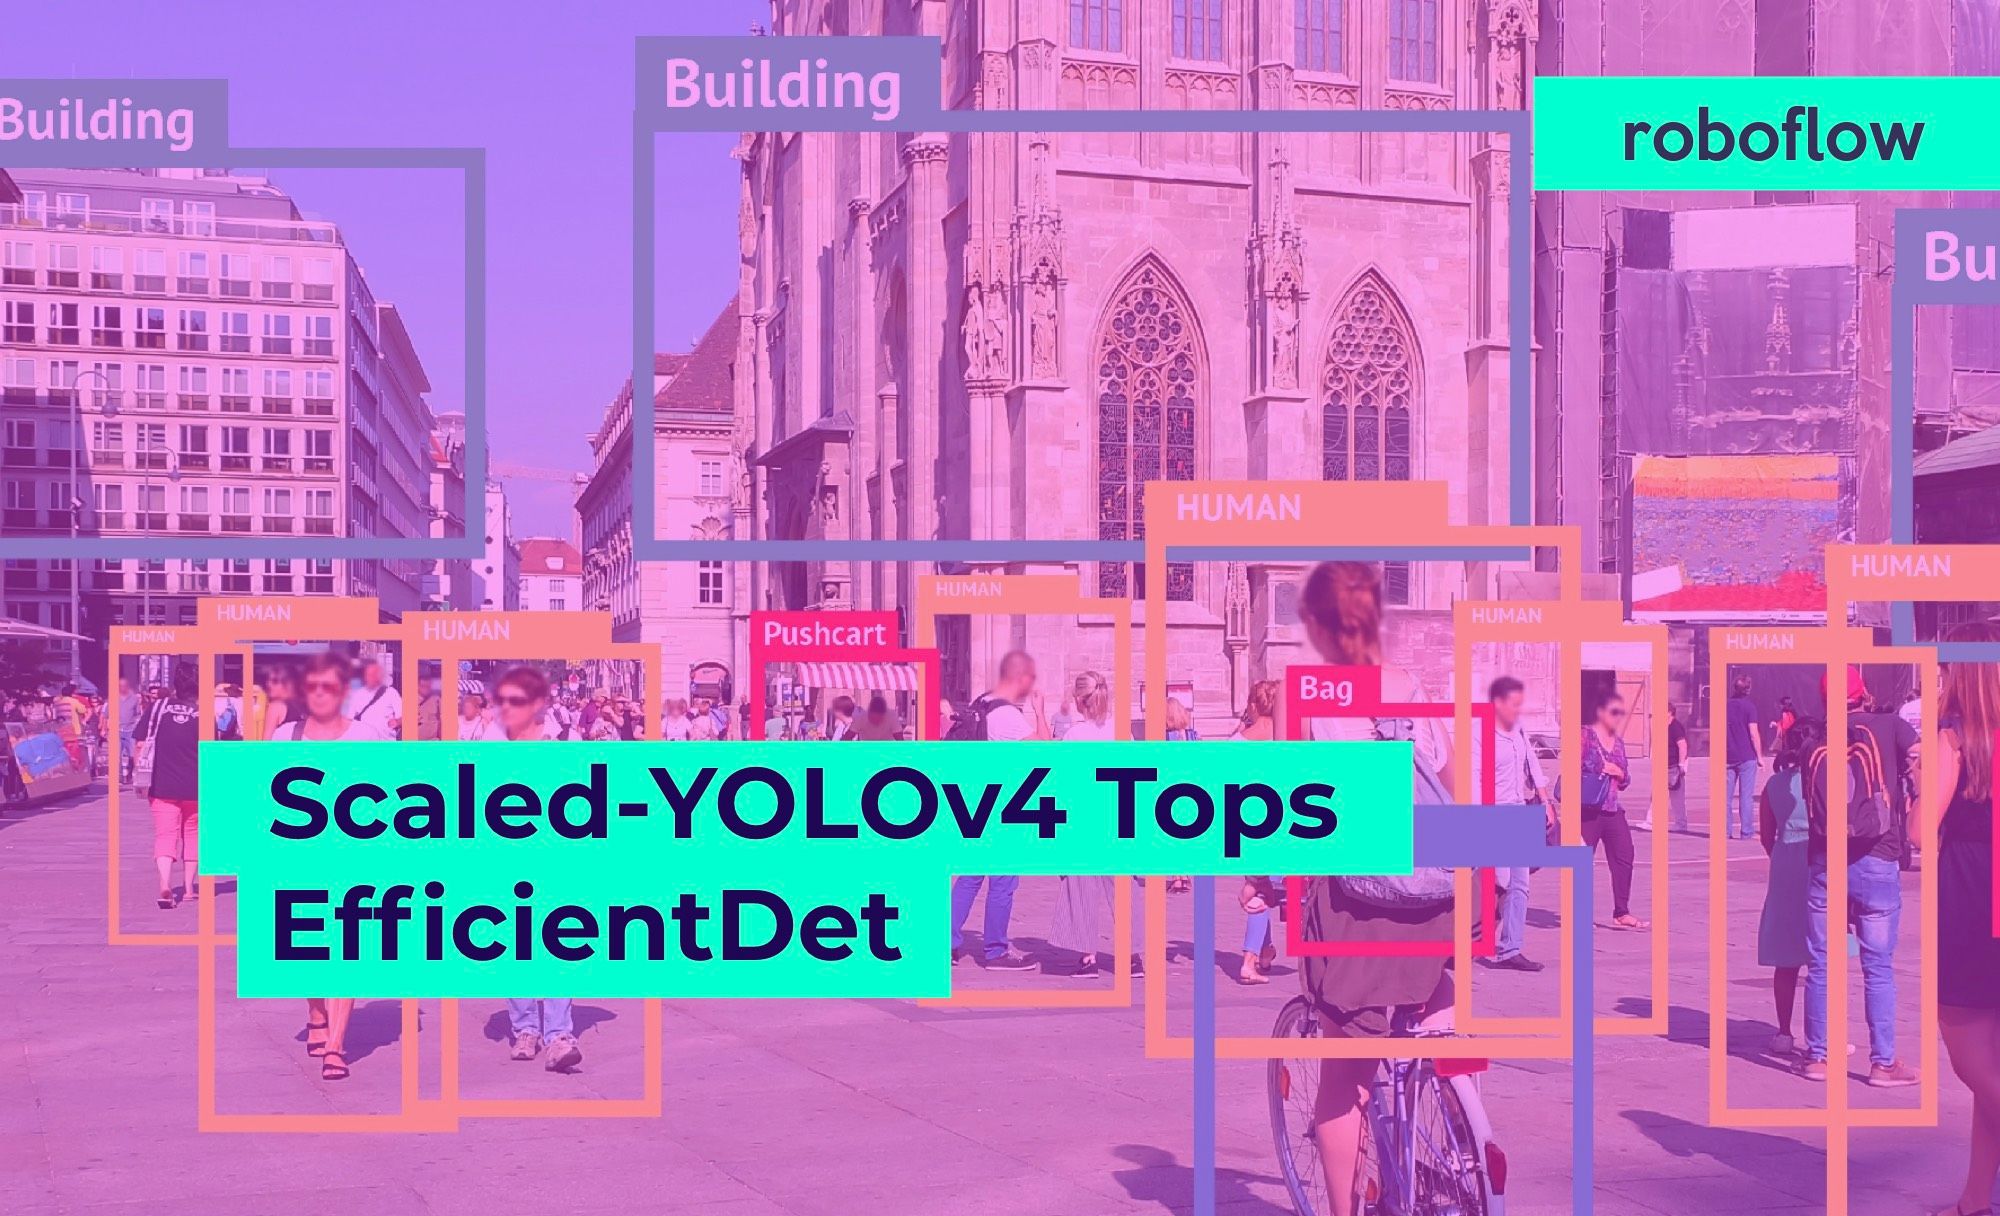 Scaled-YOLOv4 is Now the Best Model for Object Detection